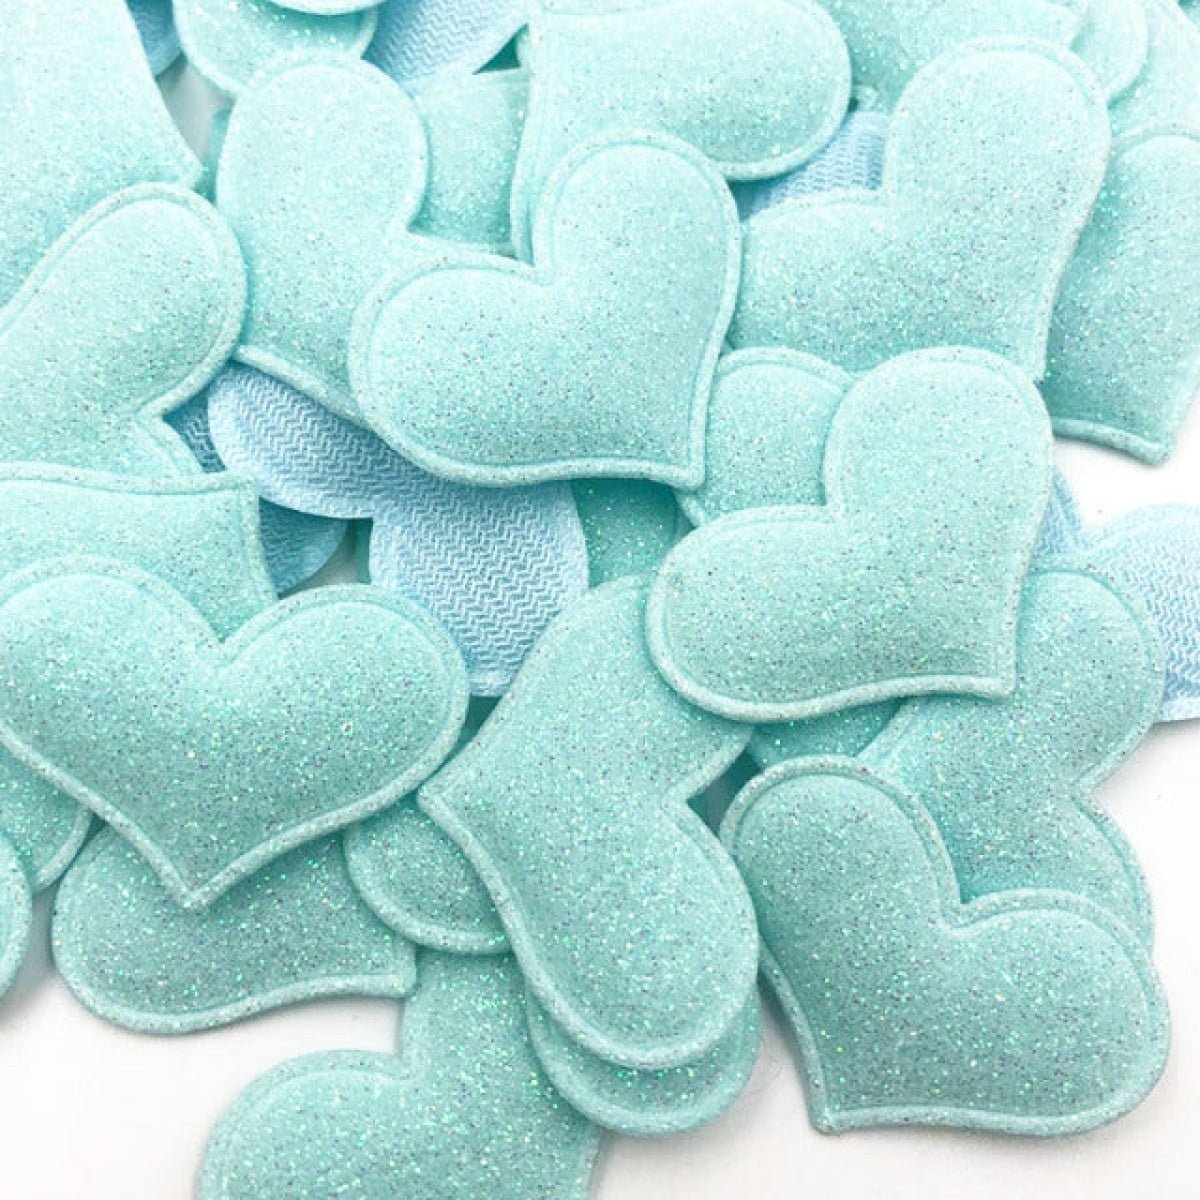 50pcs 35mmx30mm Glitter Padded Heart Felt Patches Appliques For Clothing Sewing DIY Wedding Decoration Toy Craft Shapes PU Leather - Blue - - Asia Sell